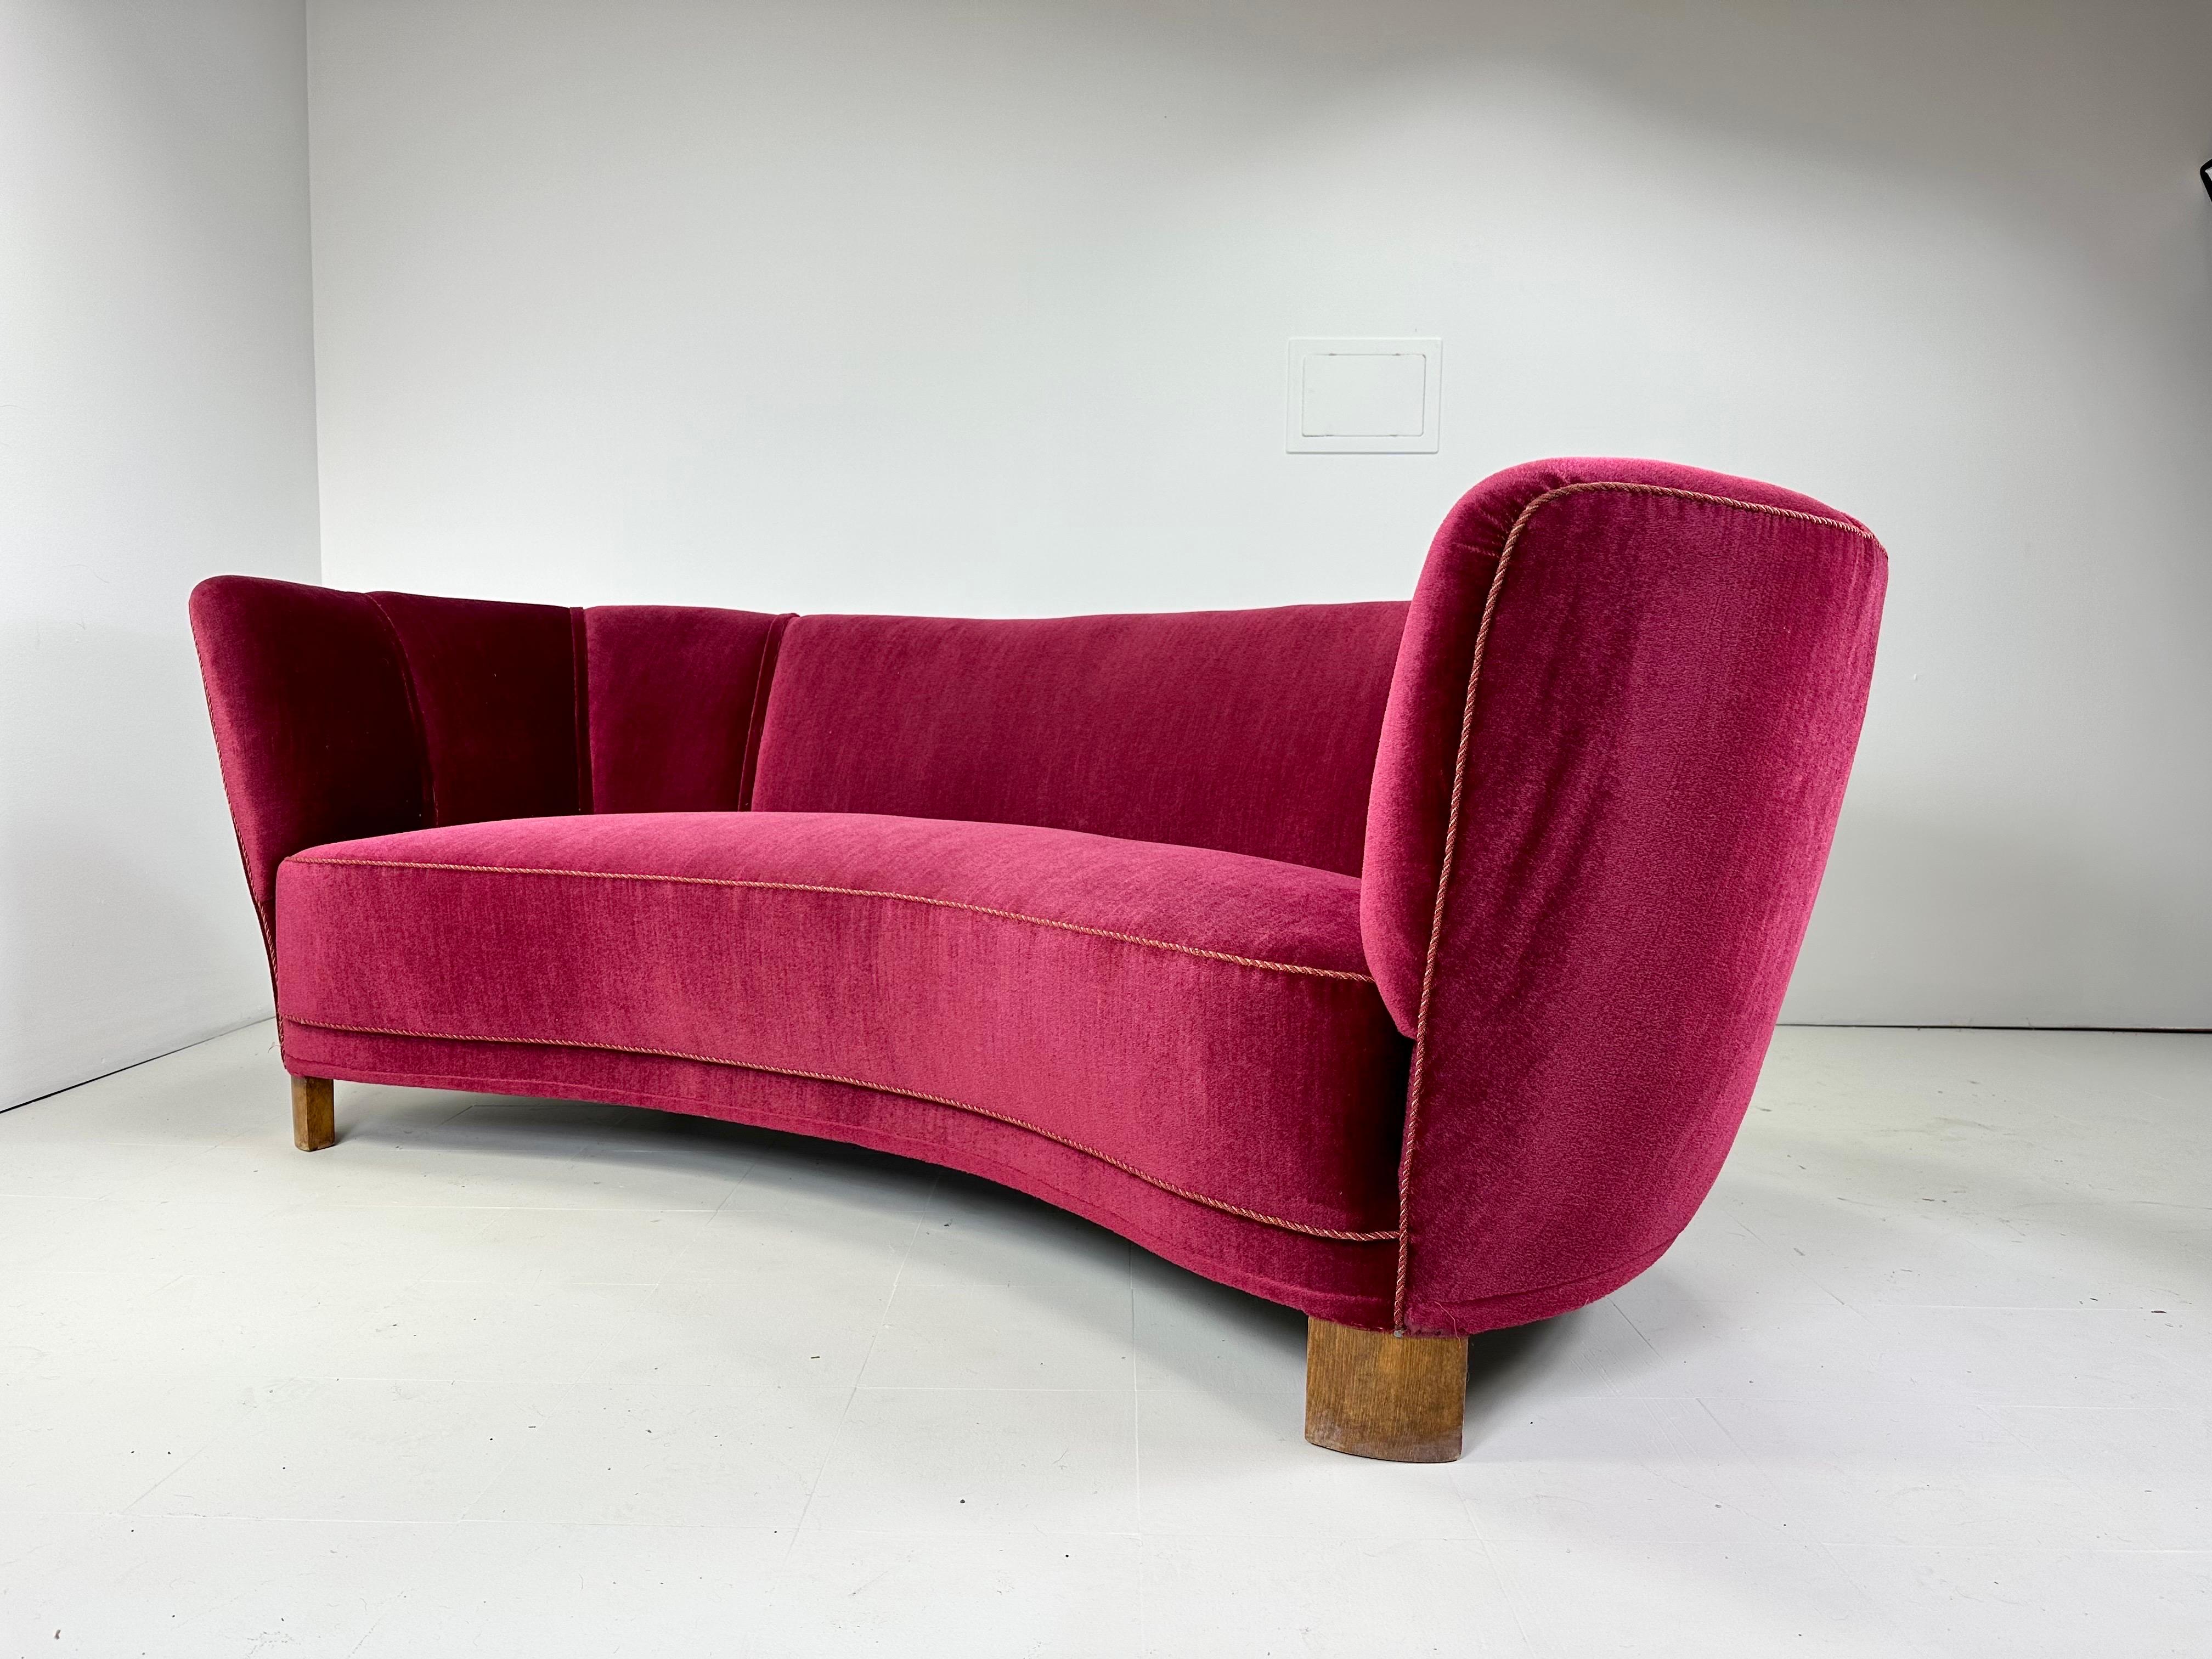 1940’s Curved Danish Sofa. Classic elegant form with colorful velvet upholstery. Birch legs.